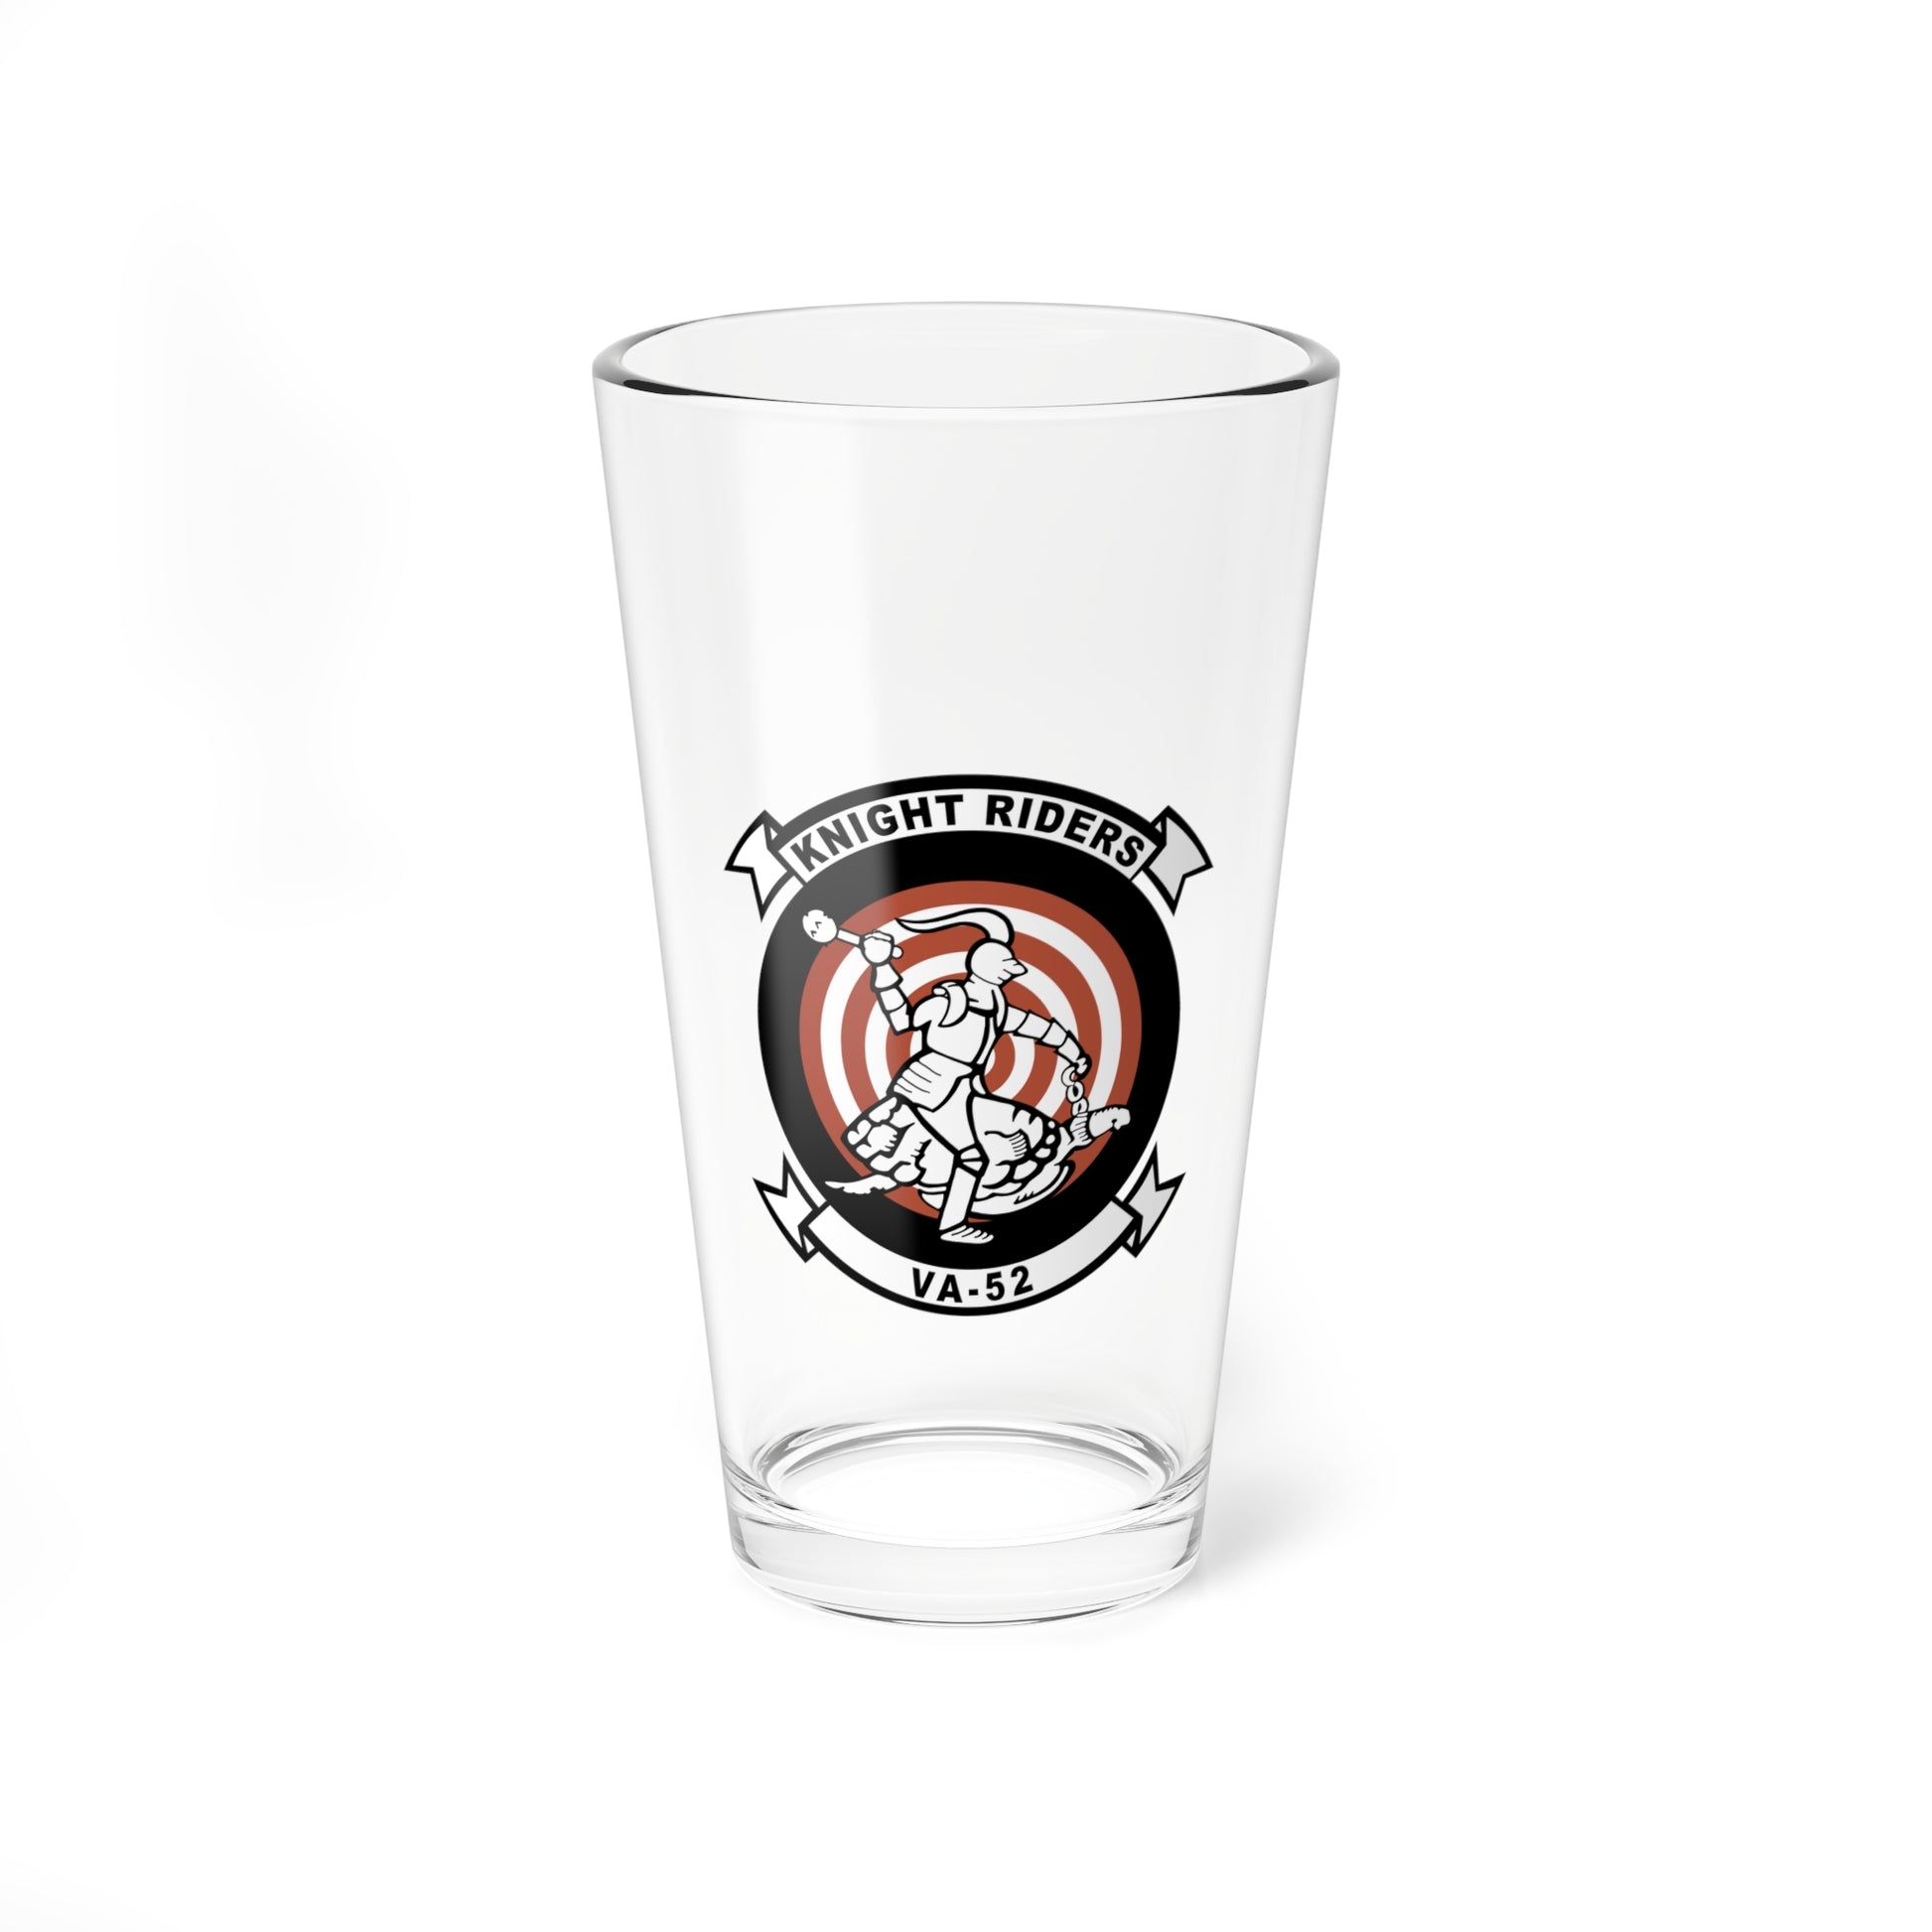 VA-52 Knight Riders US Navy Attack Squadron Pint Glass for Retired and Veterans